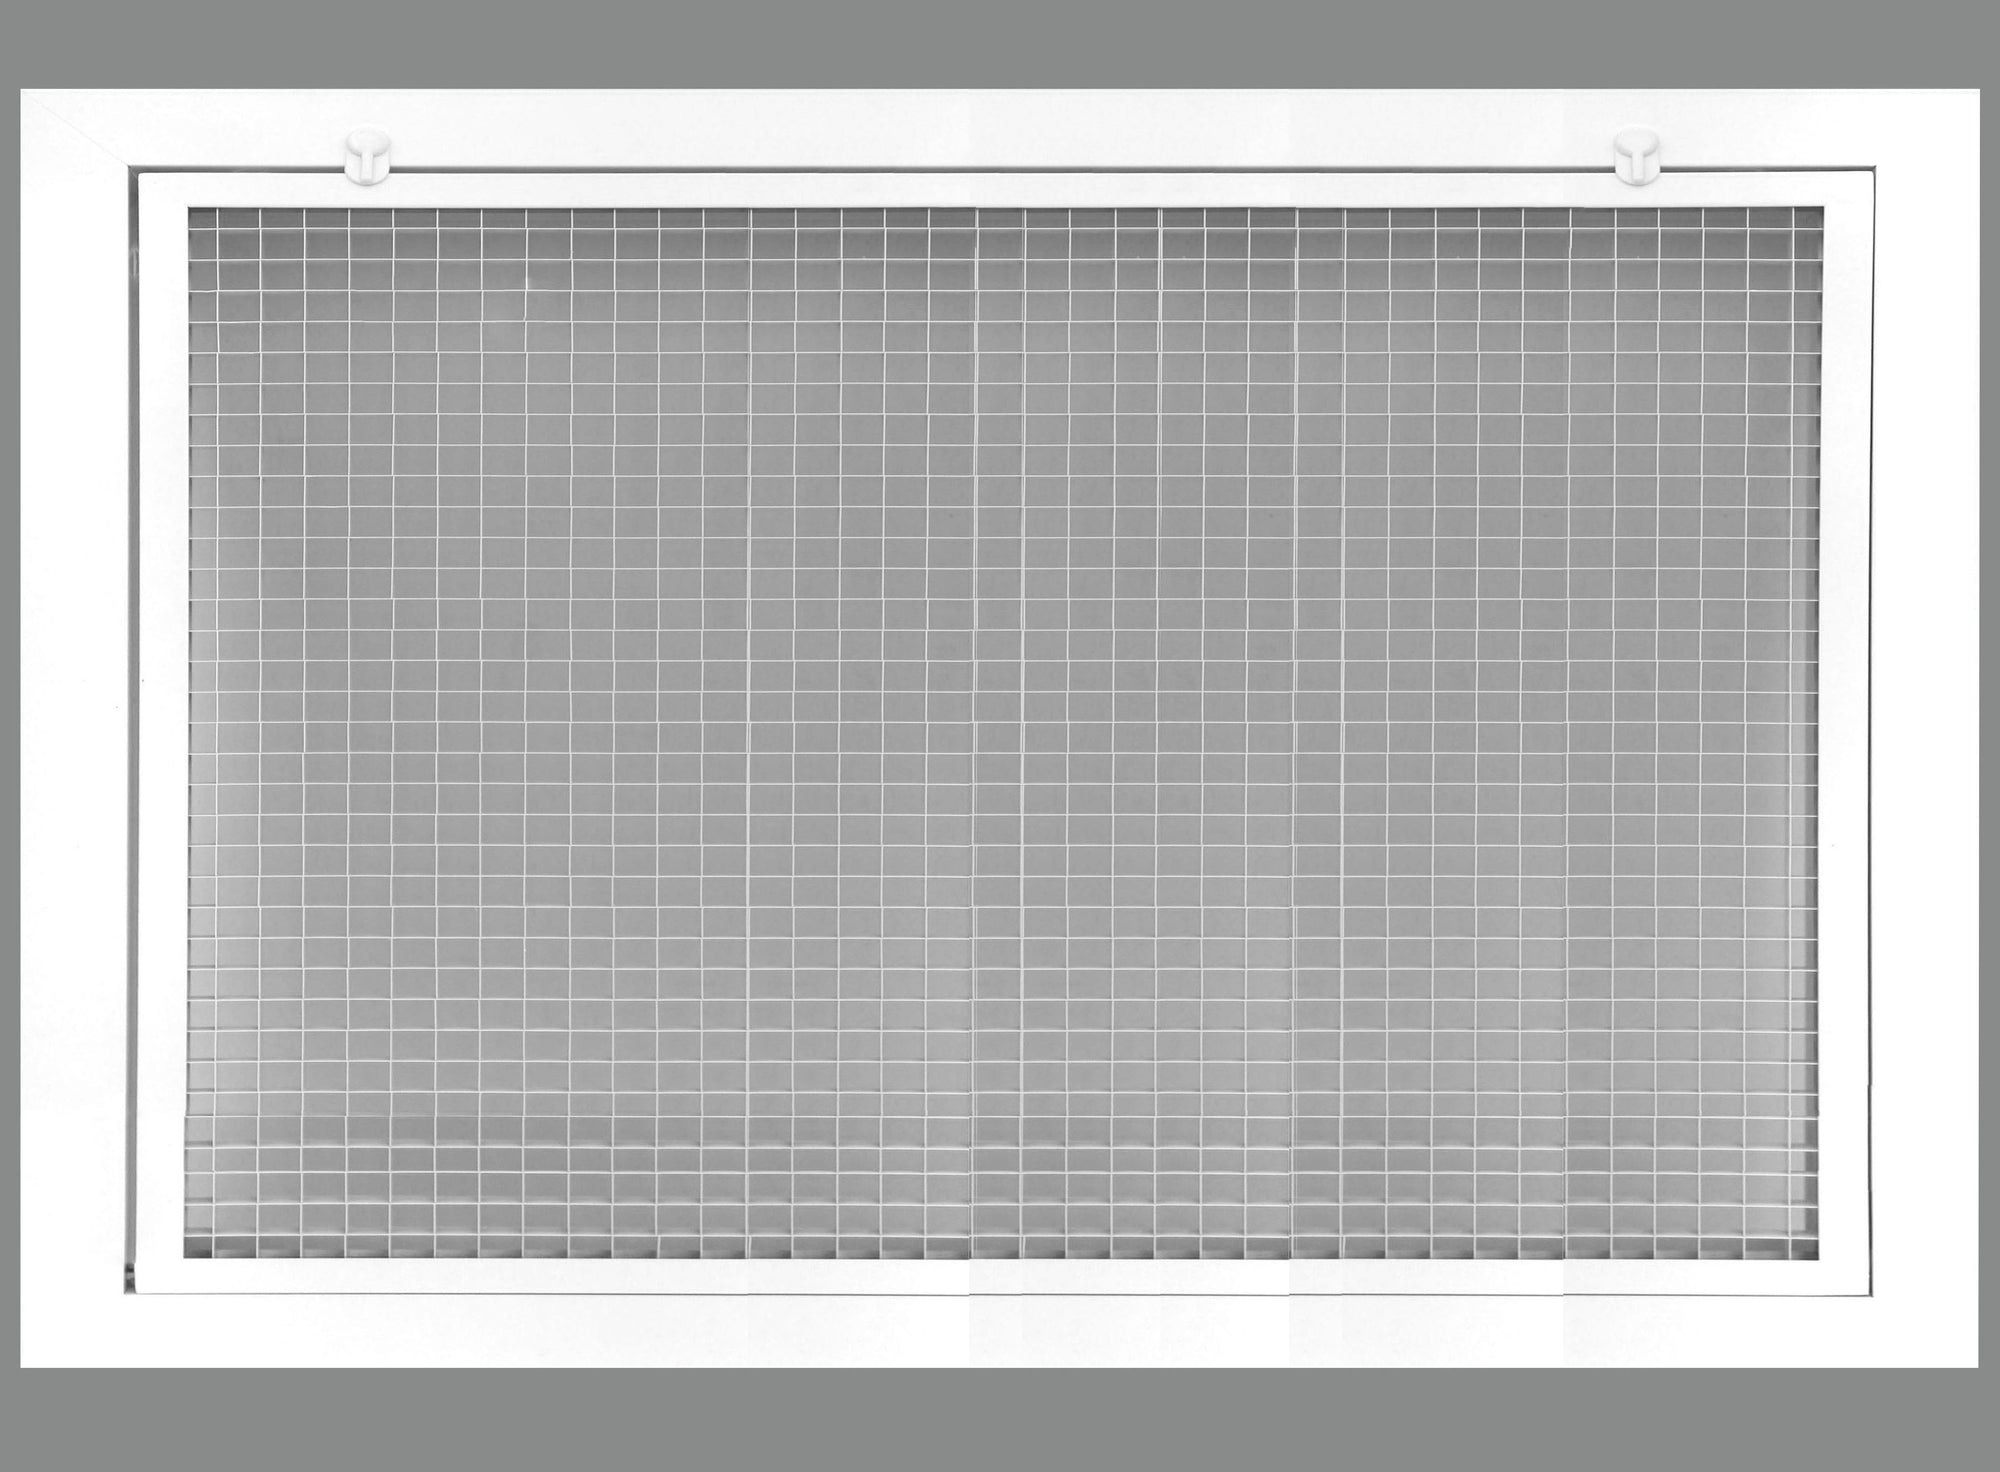 30" x 24" Cube Core Eggcrate Return Air Filter Grille for 1" Filter